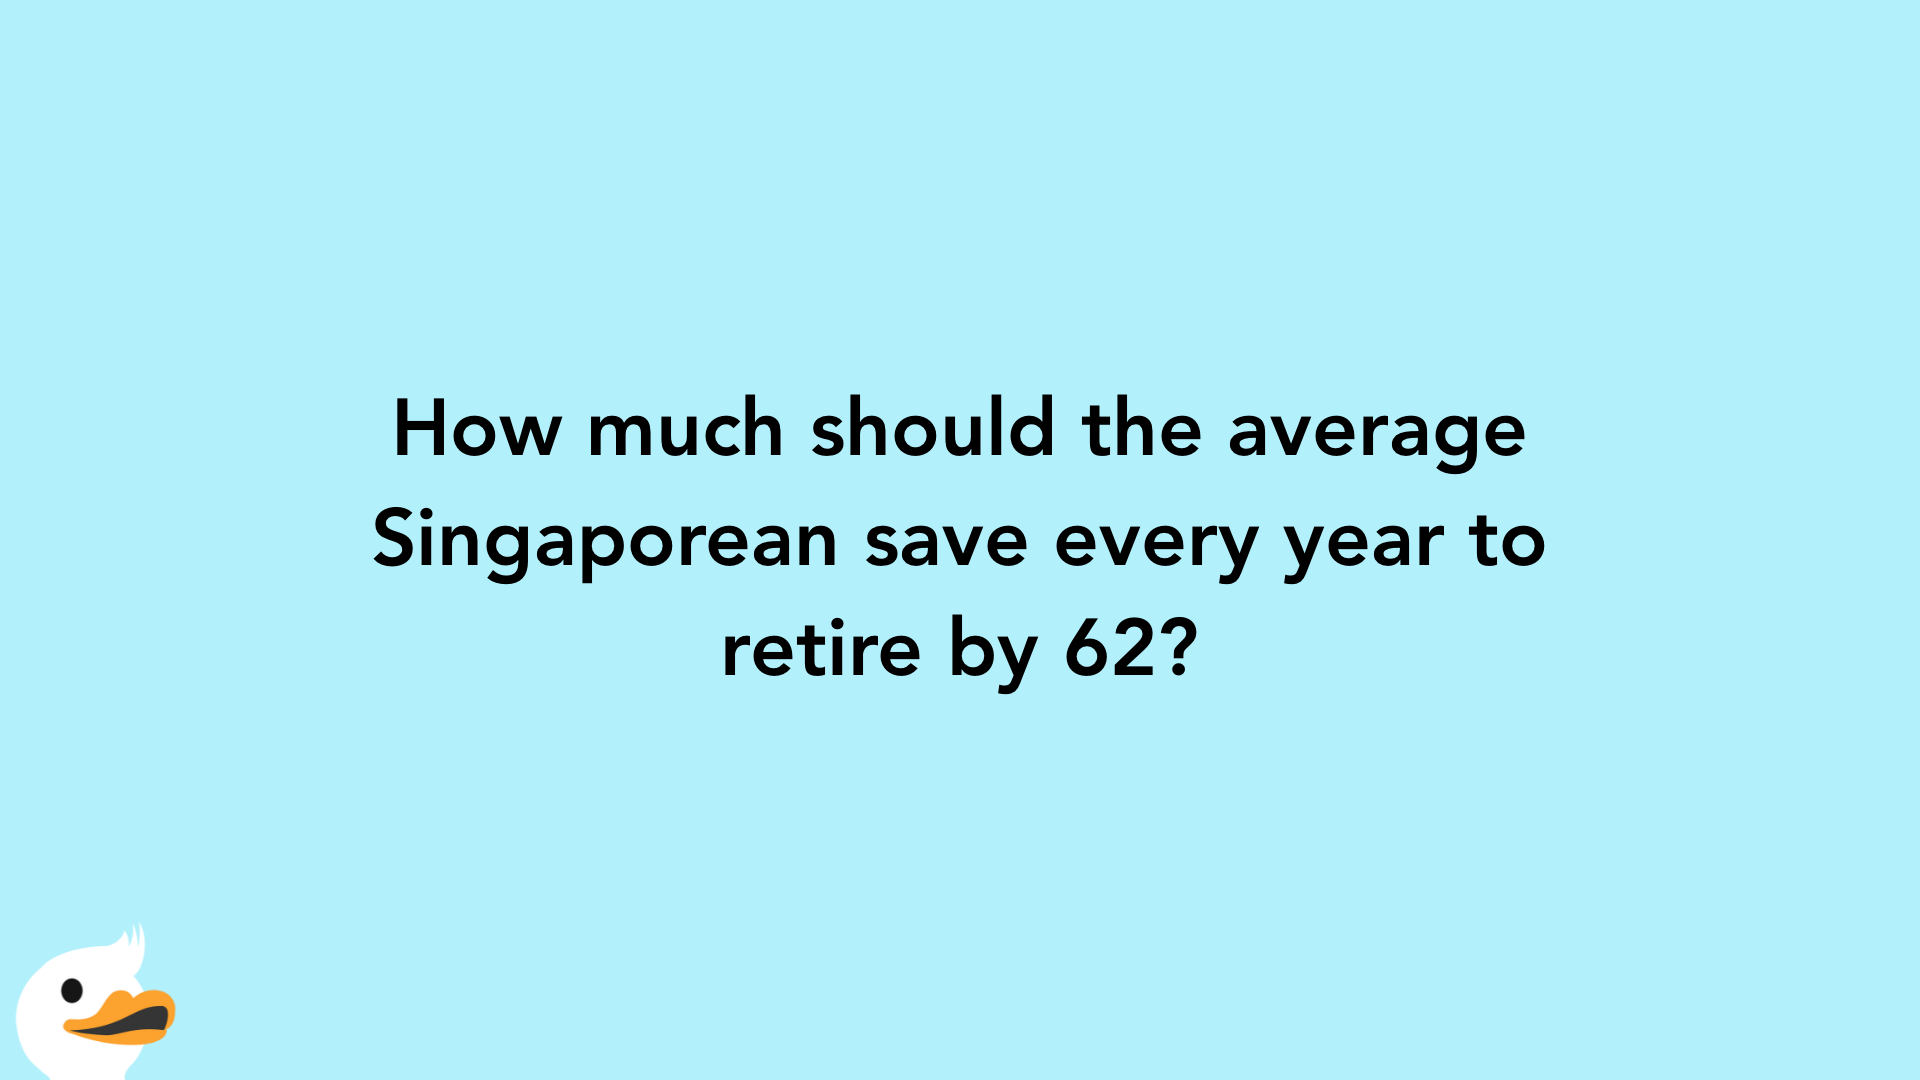 How much should the average Singaporean save every year to retire by 62?